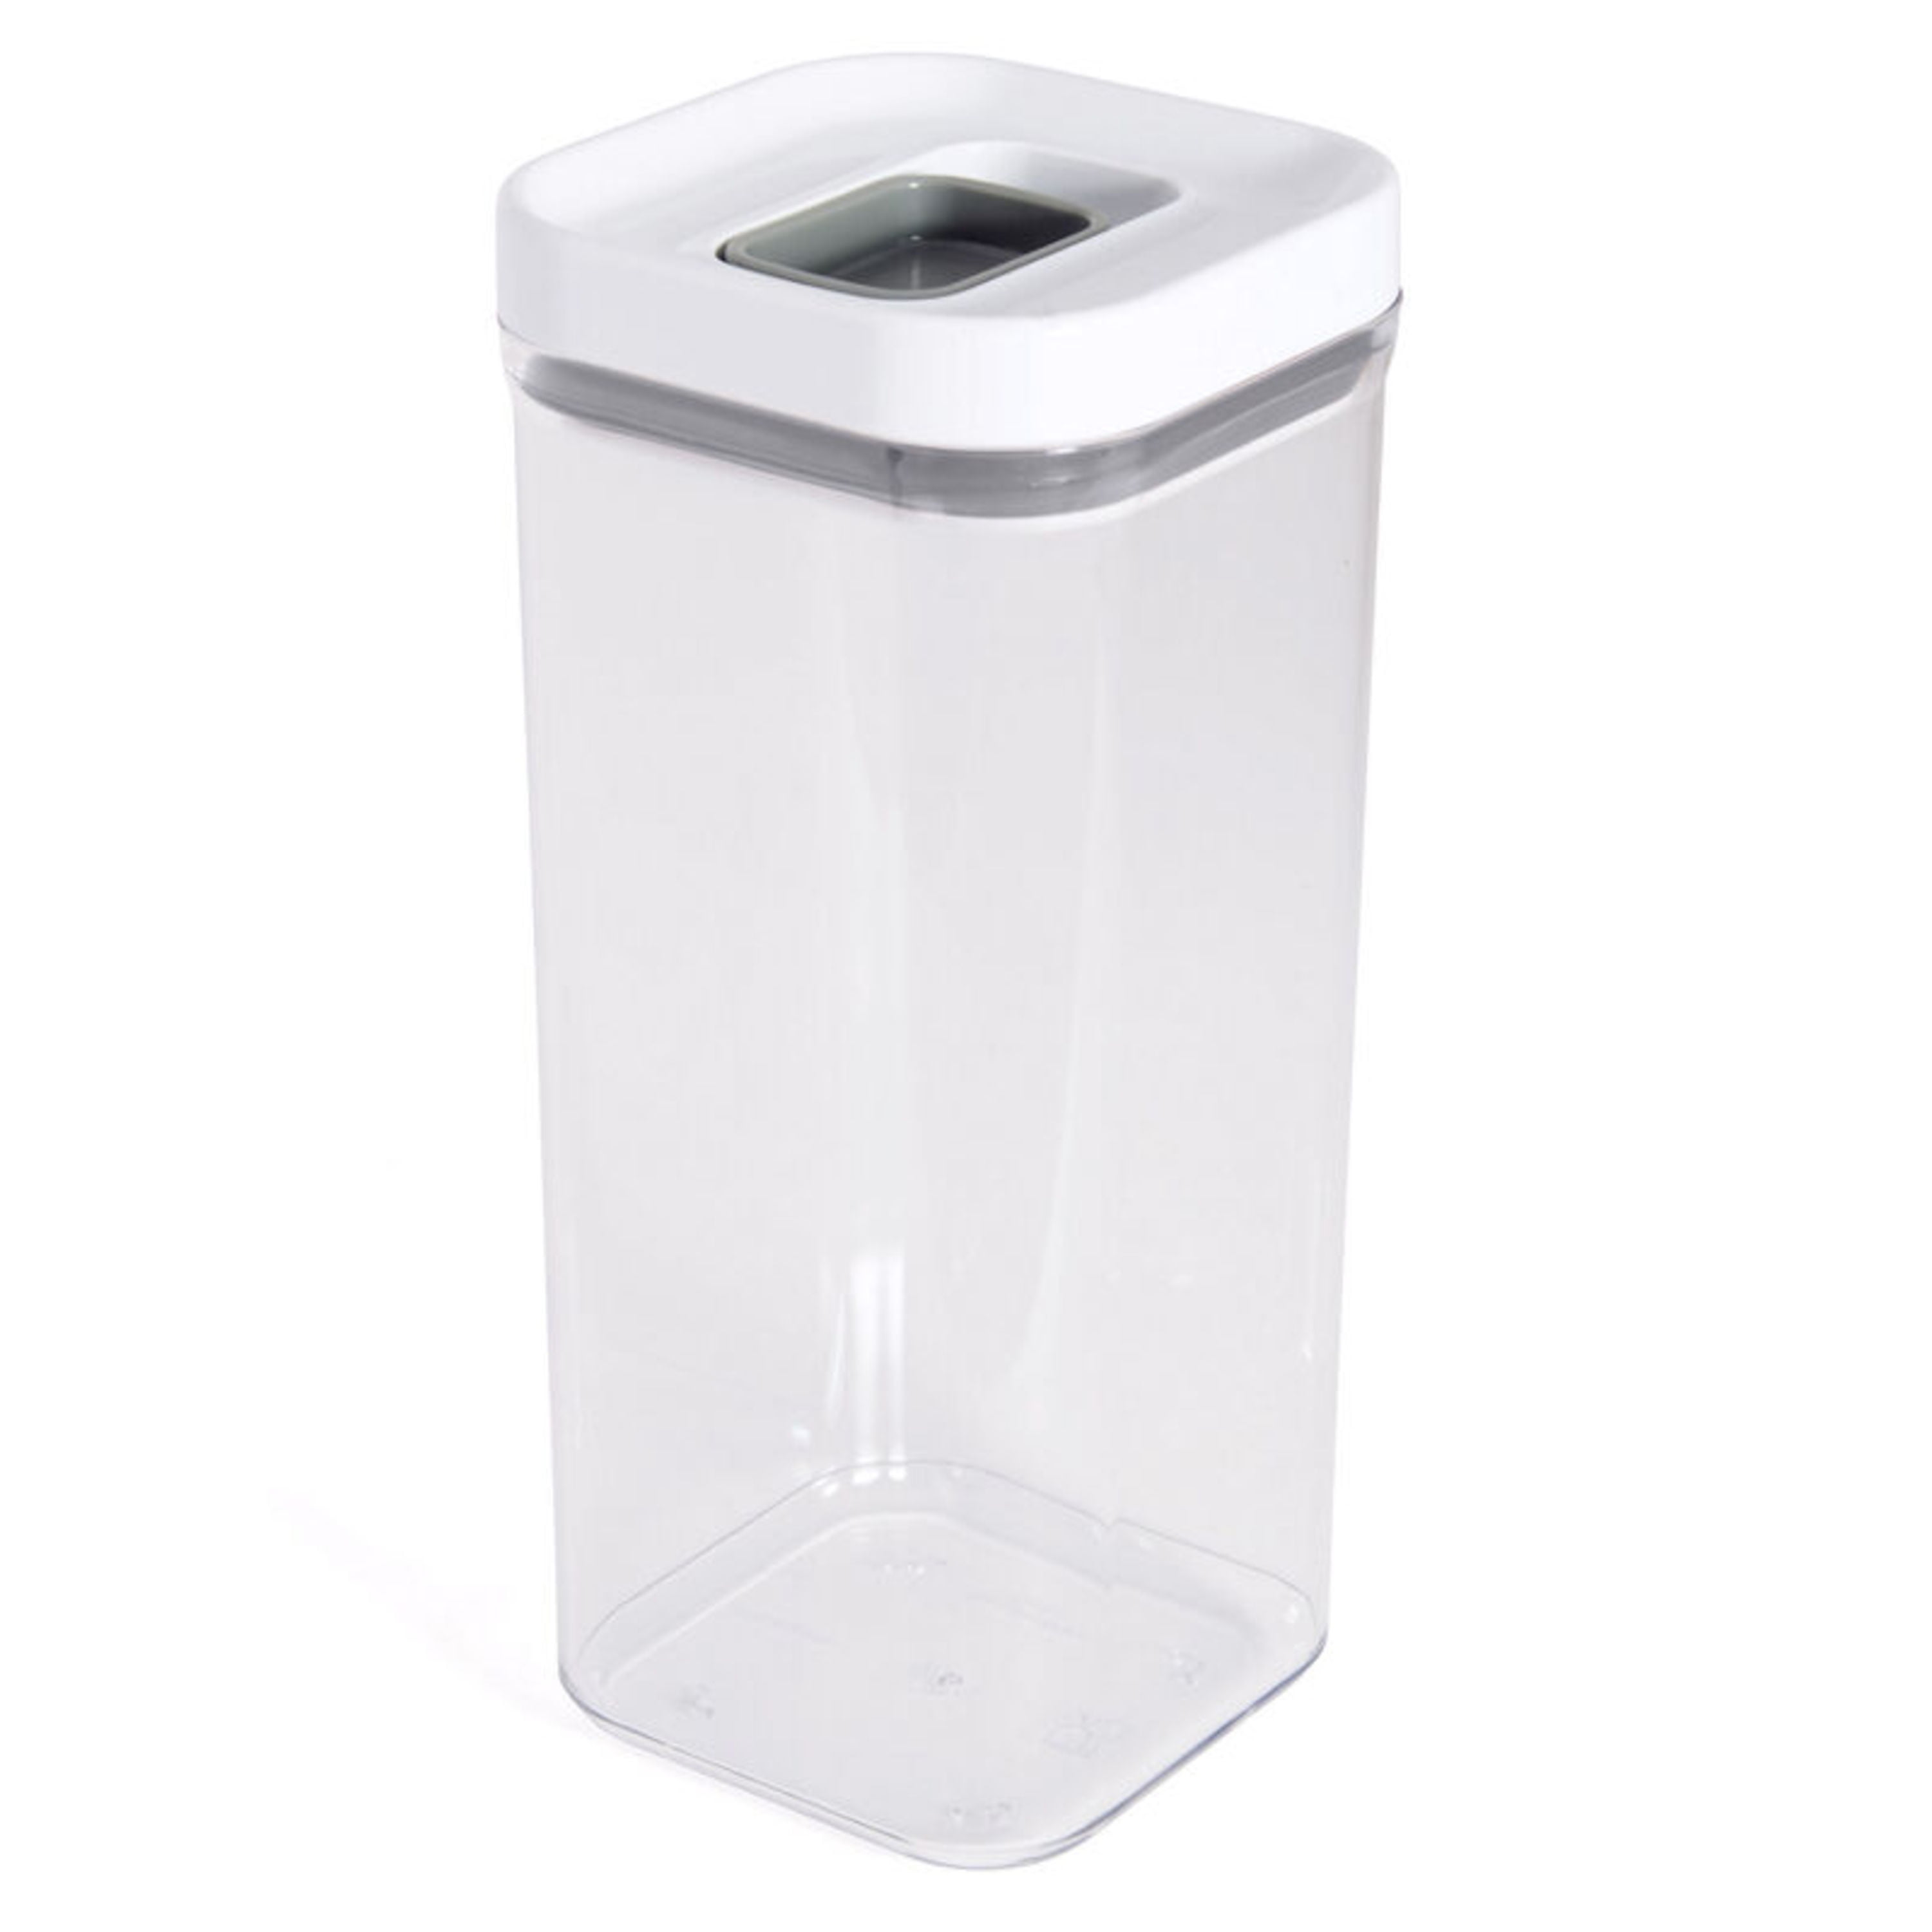 Copco Clear Pantry or Food Storage Container 4.43-quart